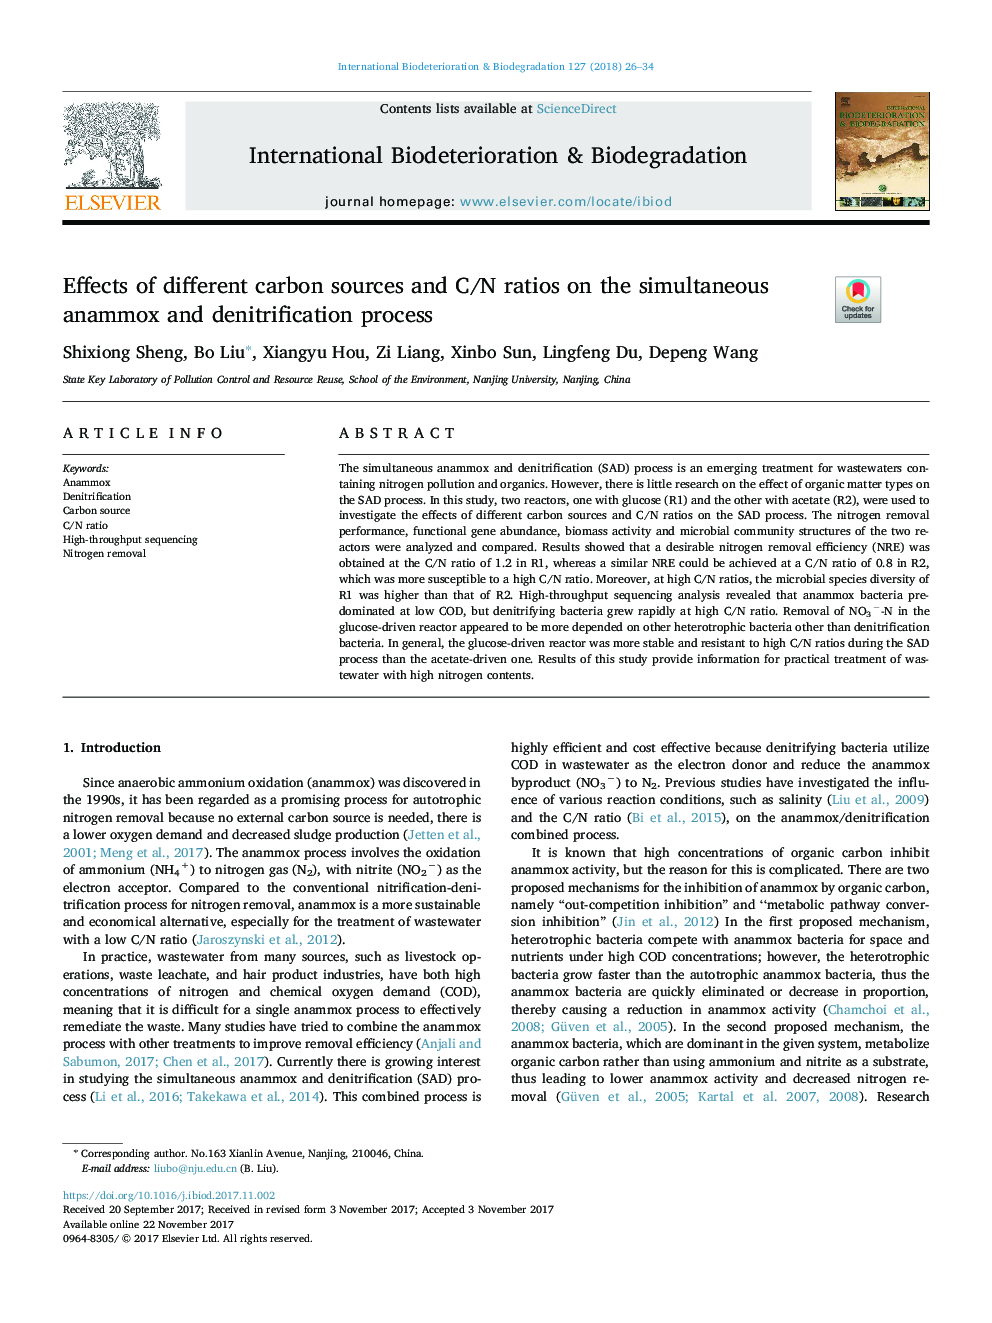 Effects of different carbon sources and C/N ratios on the simultaneous anammox and denitrification process